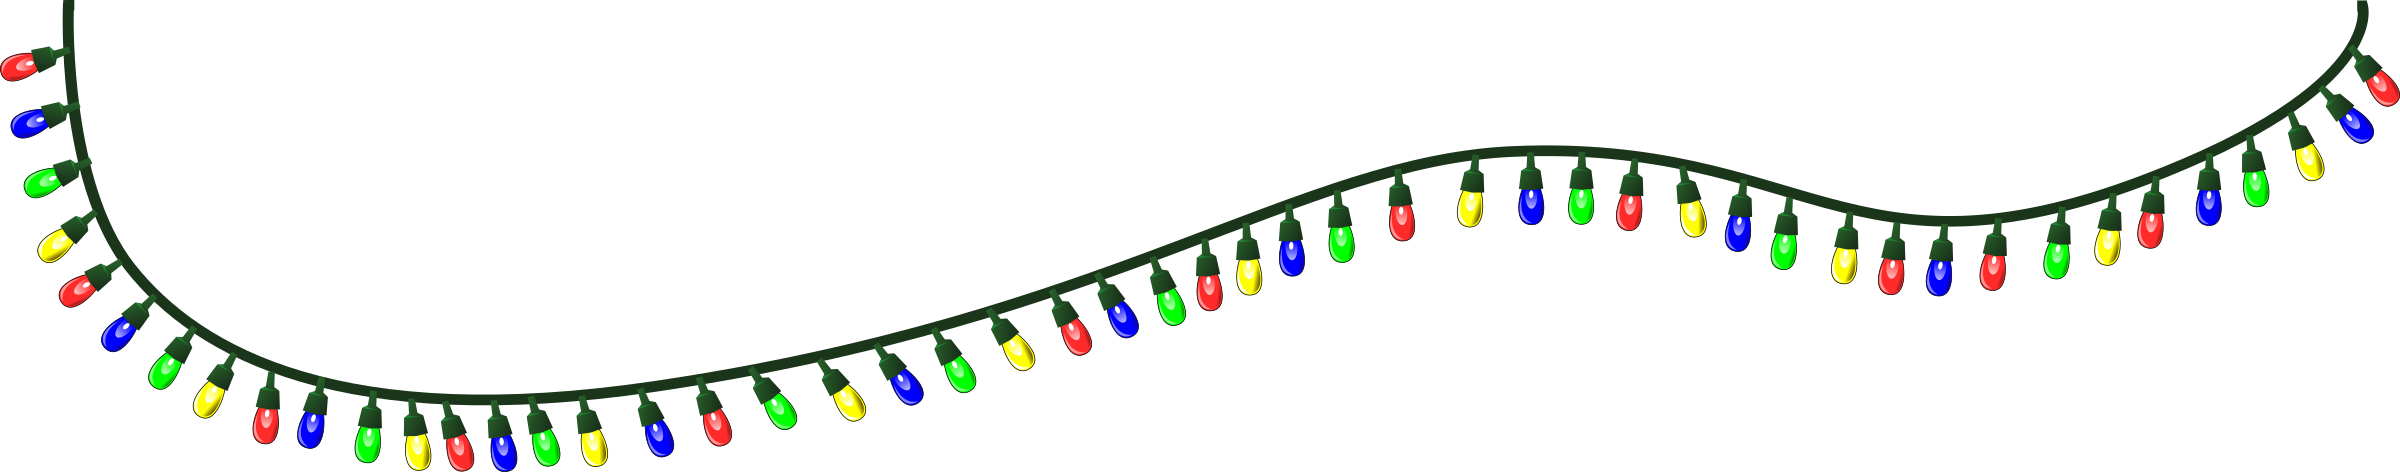 string of christmas lights clipart - photo #10